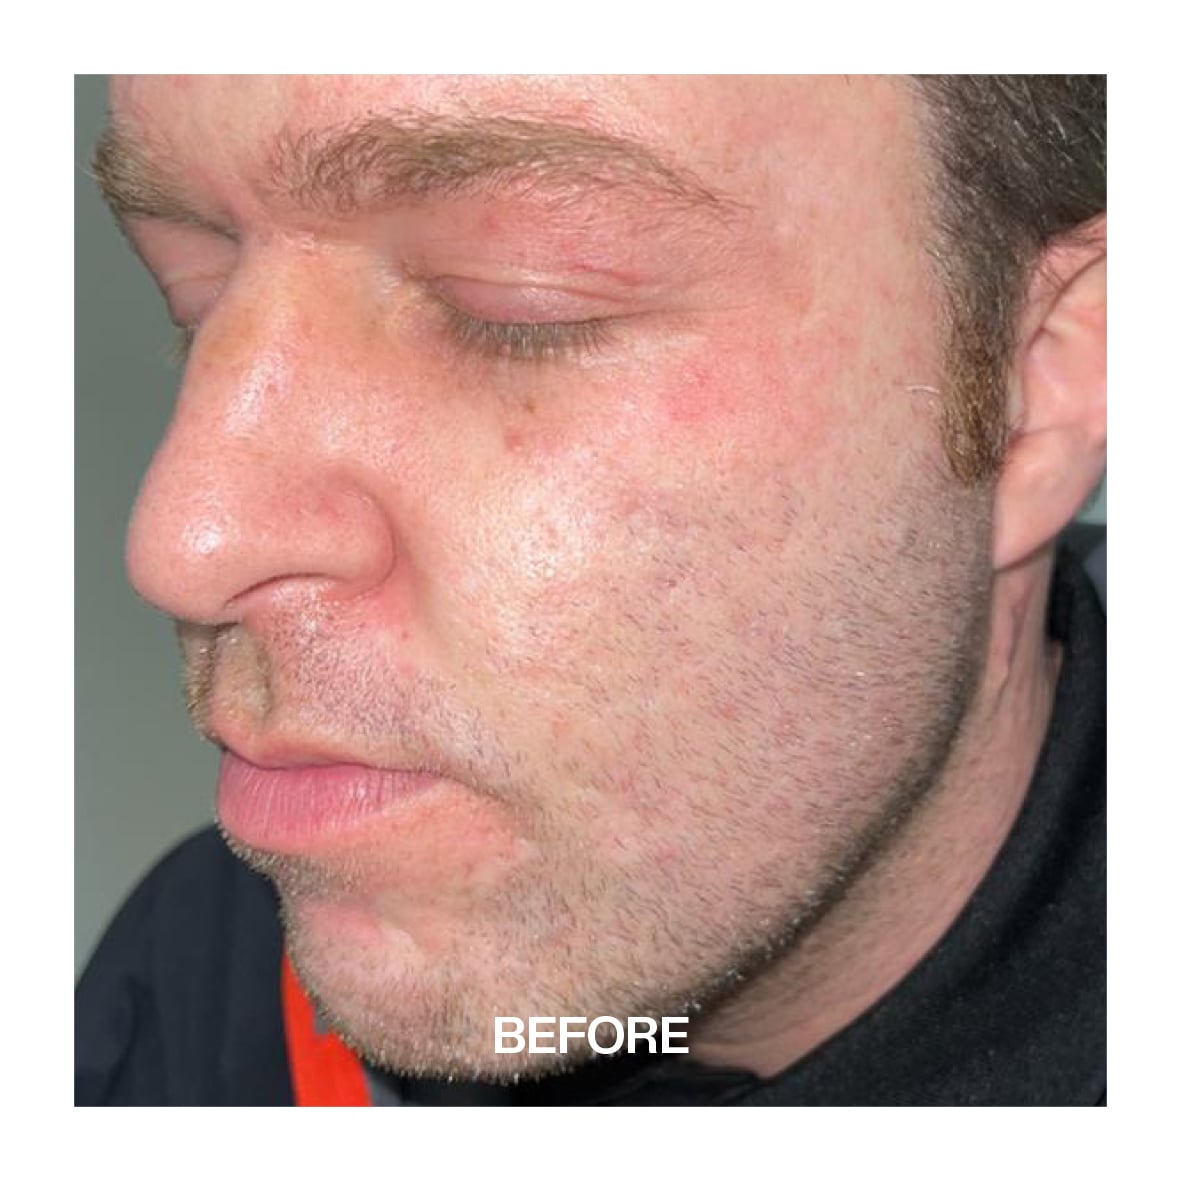 Acne Scar man before image